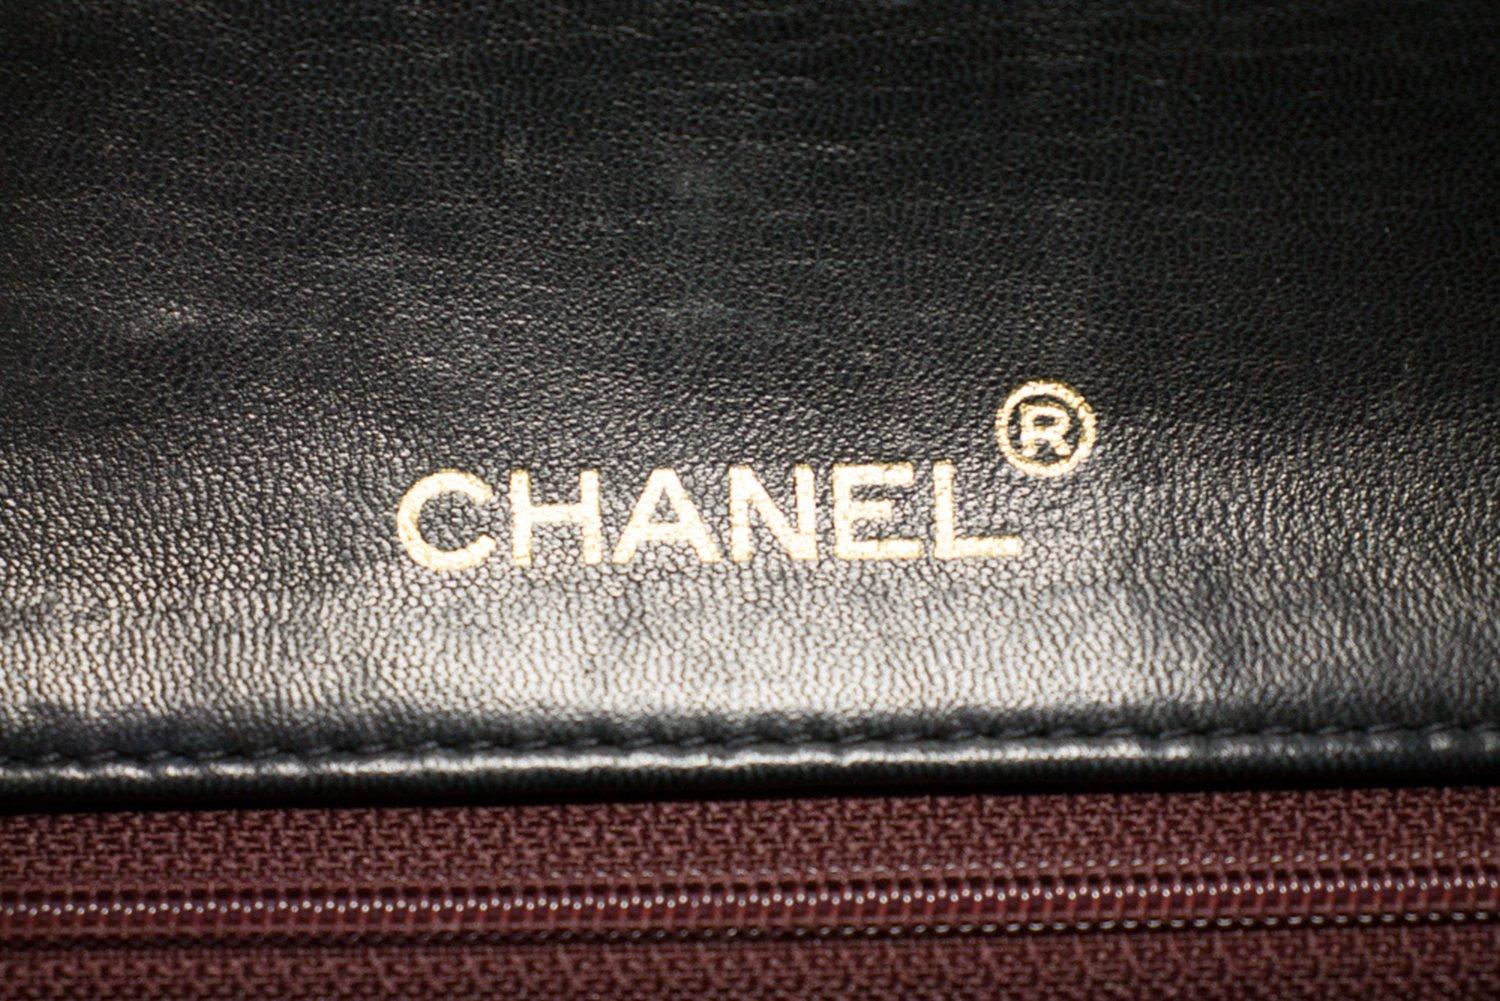 CHANEL Chain Shoulder Bag Black Flap Quilted Lambskin Leather 10